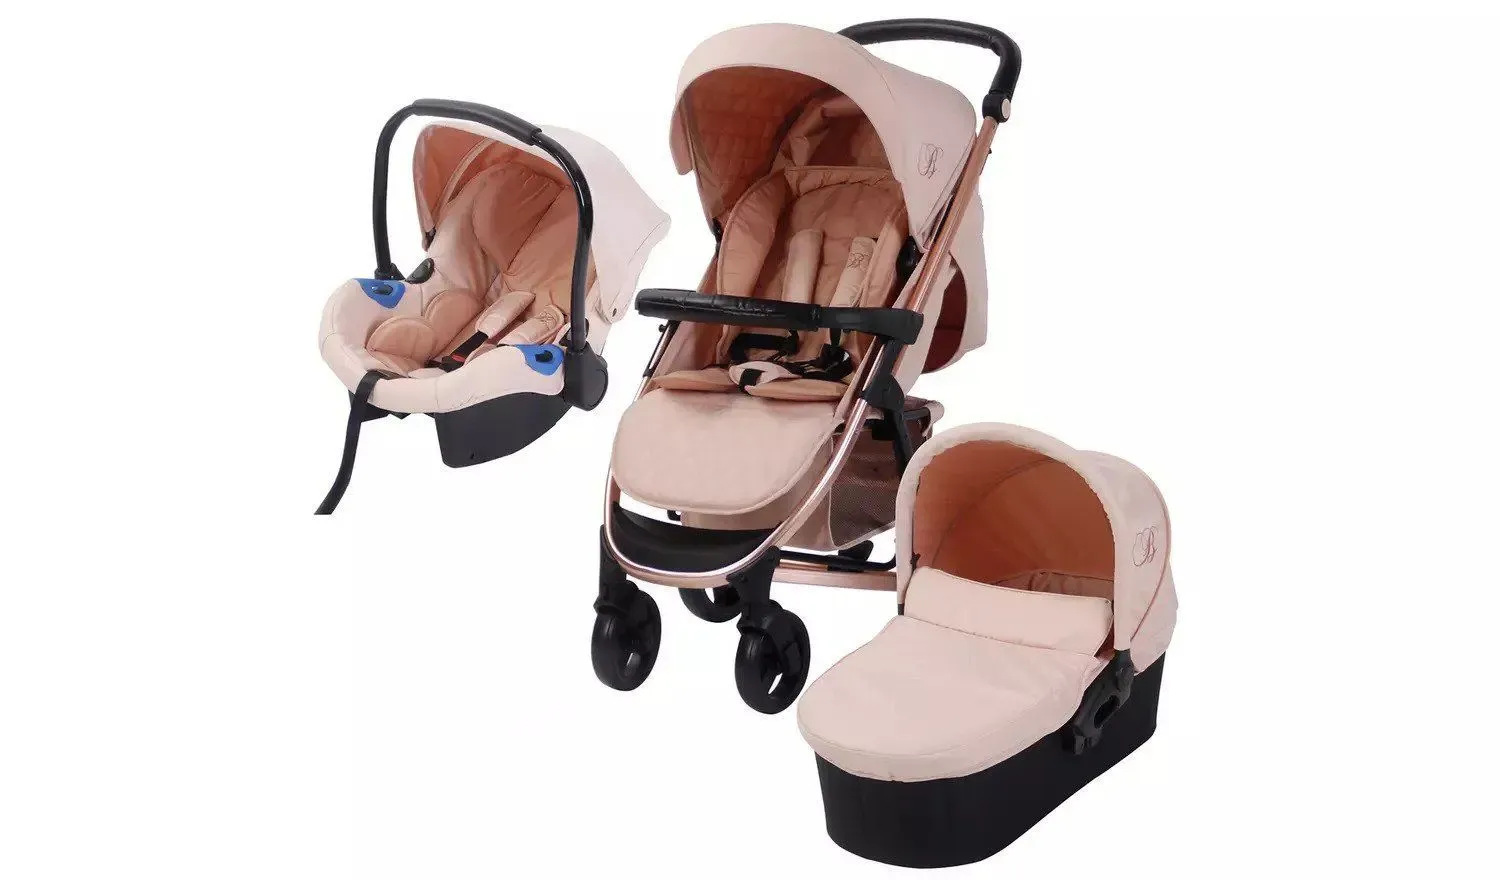 Elegant and fashionable 3 in 1 rose gold pushchair, bassinet , car seat and adaptor.